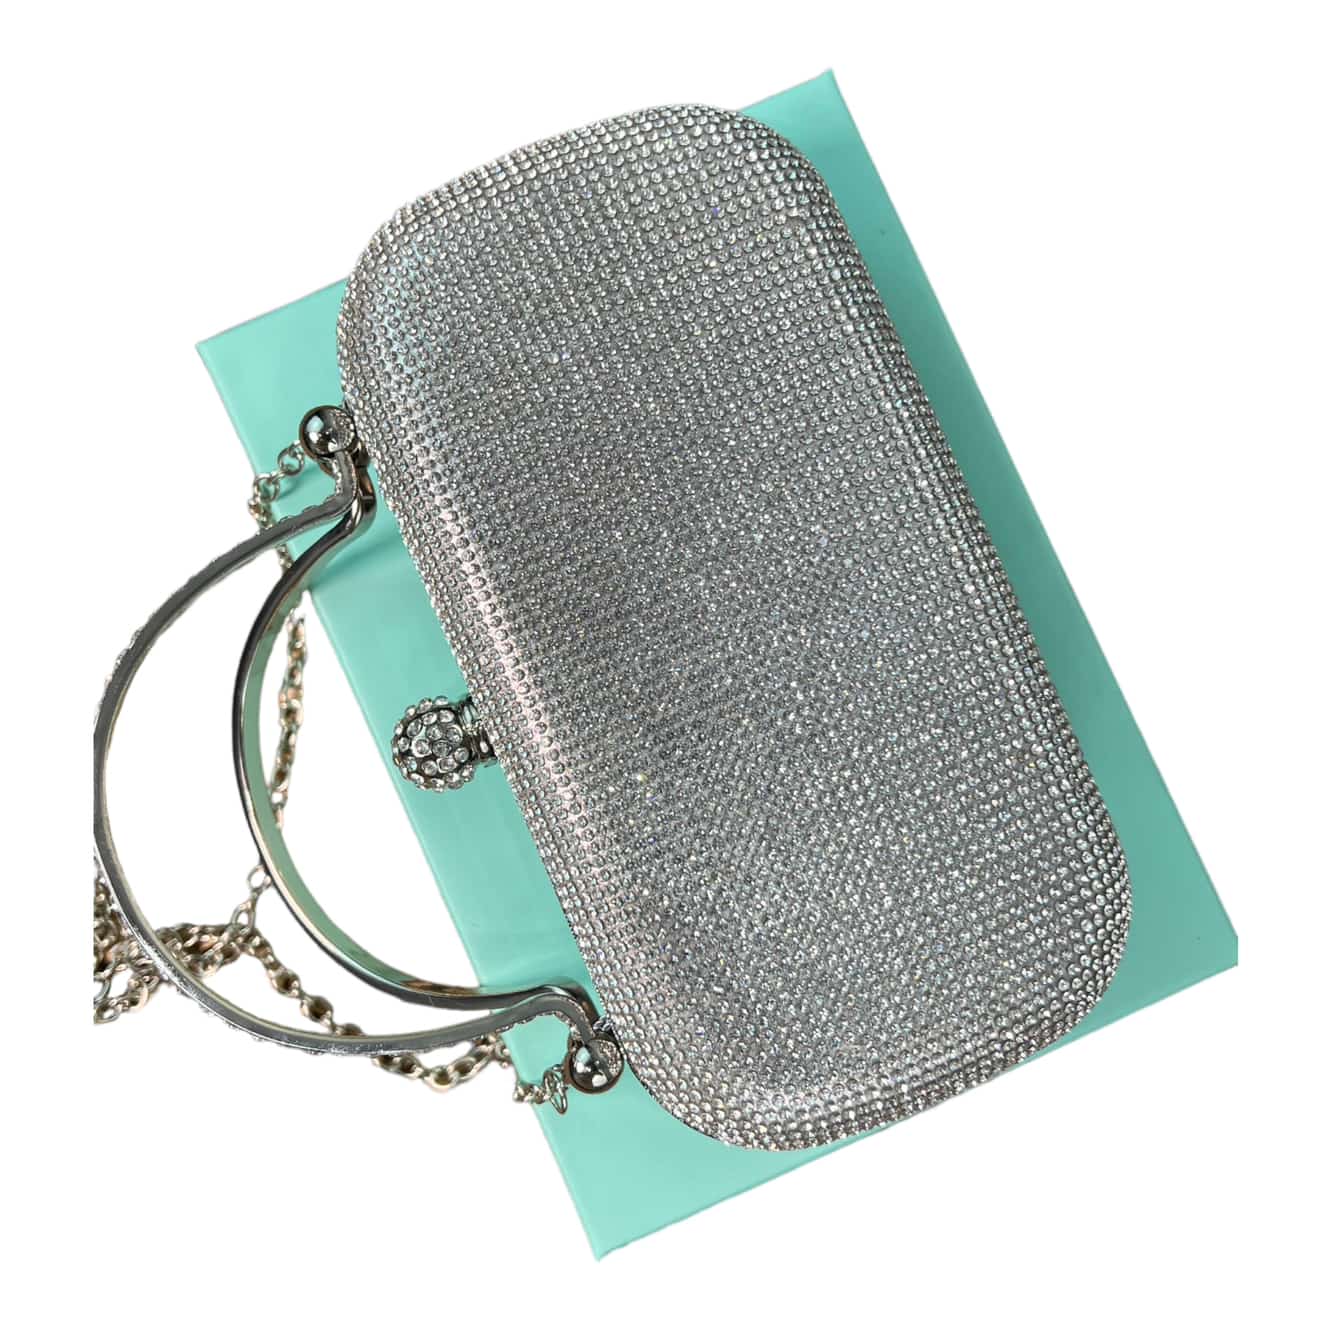 CHRISBELLA SILVER DOUBLE HANDLE EMBELLISHED CLUTCH PURSE